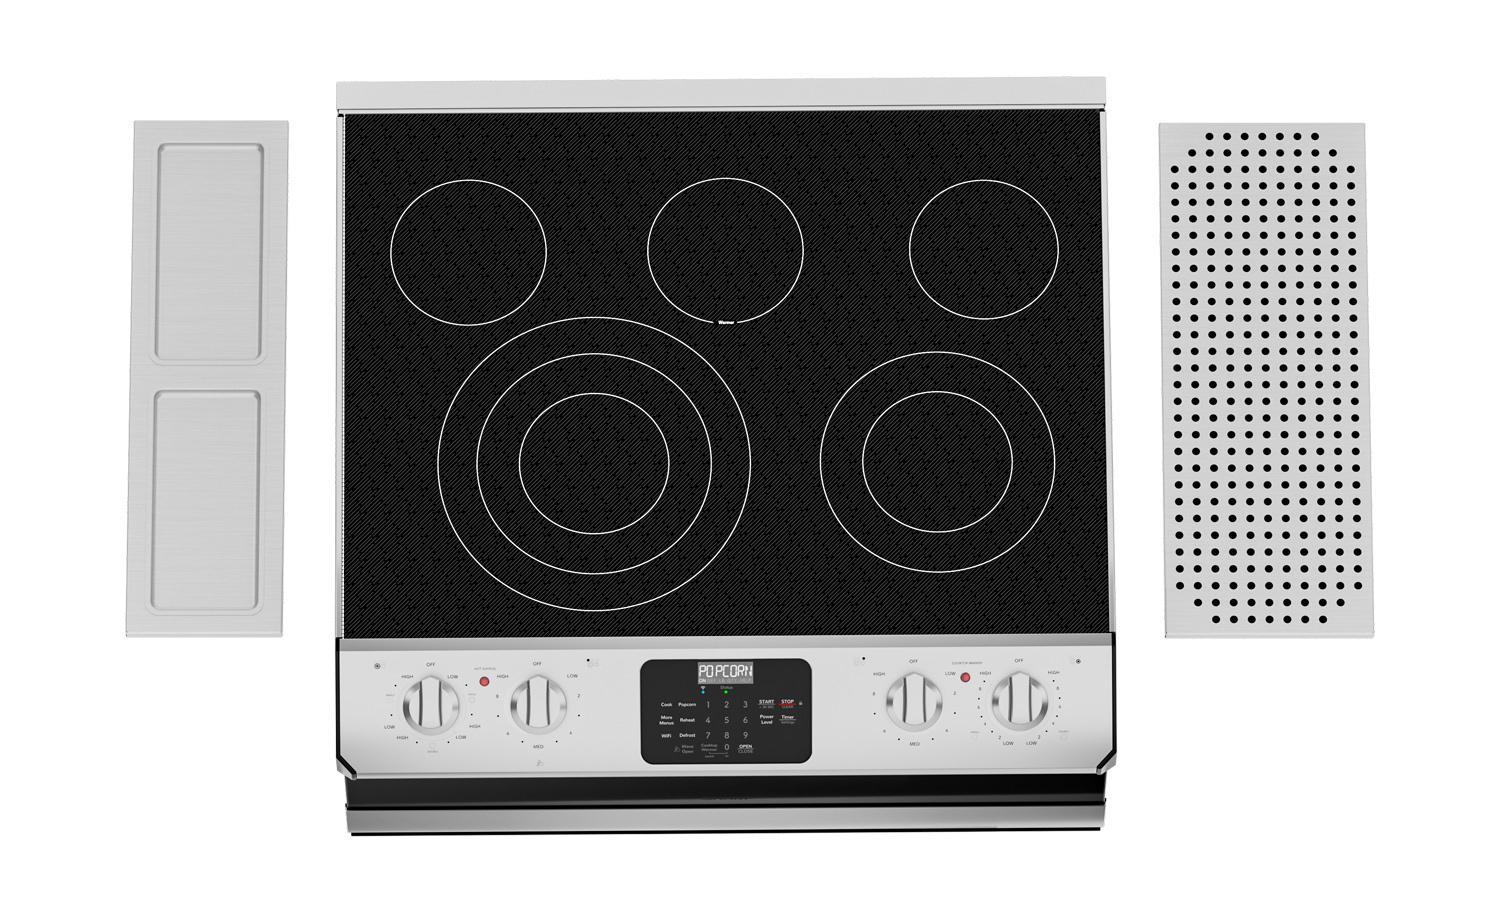 Sharp Smart Radiant Rangetop with Microwave Drawer Oven